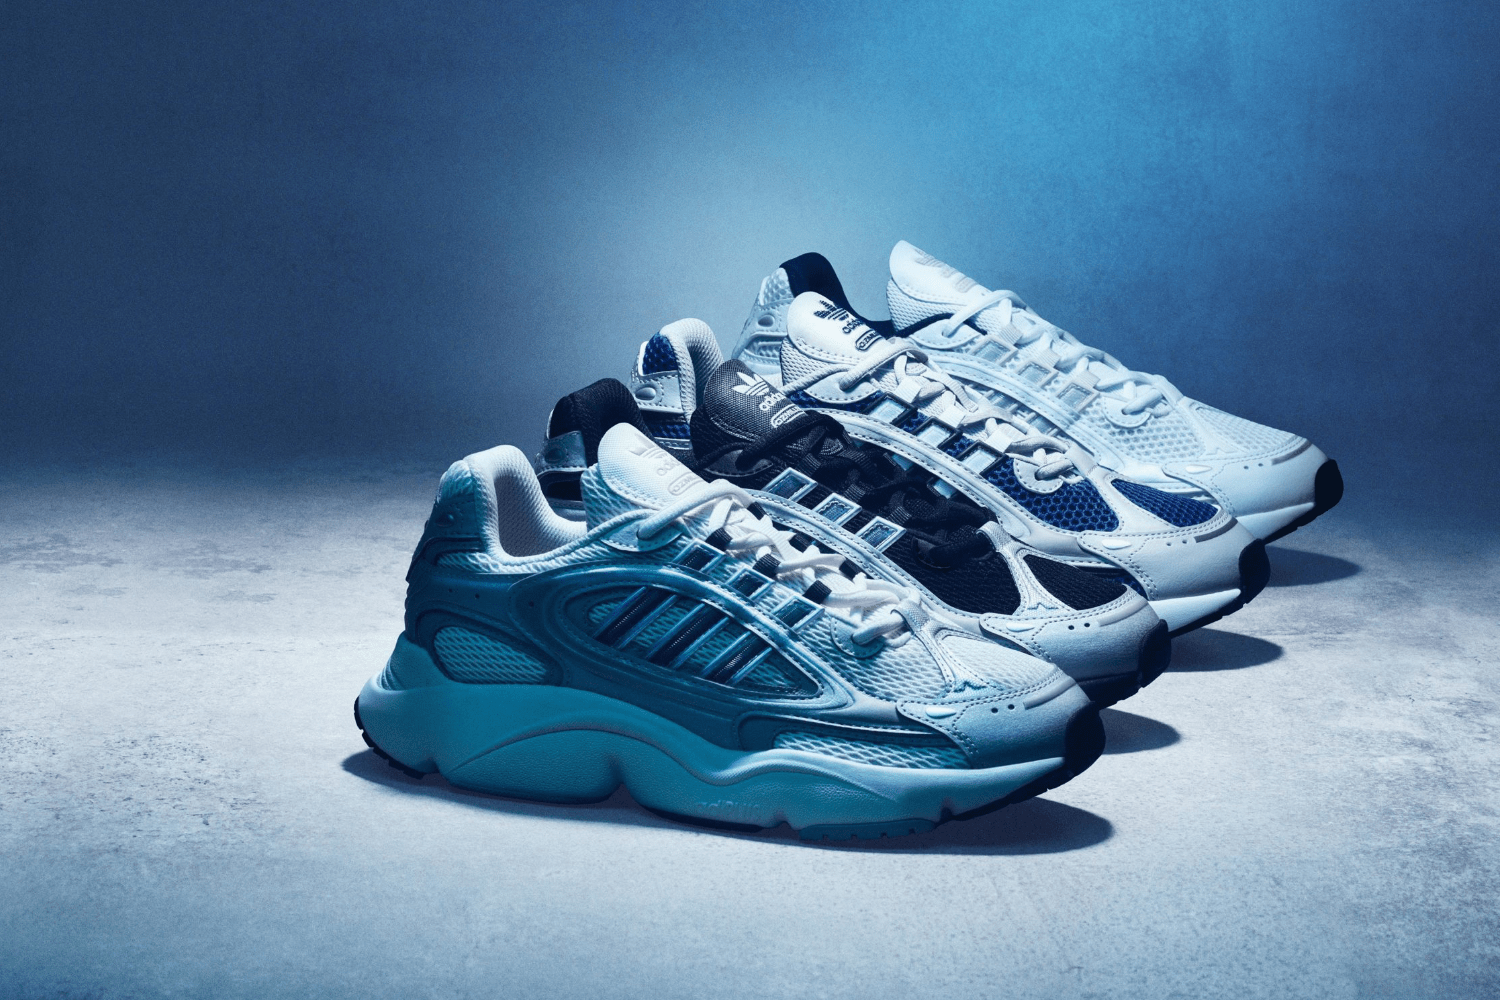 adidas presents the retro 2000 Running collection